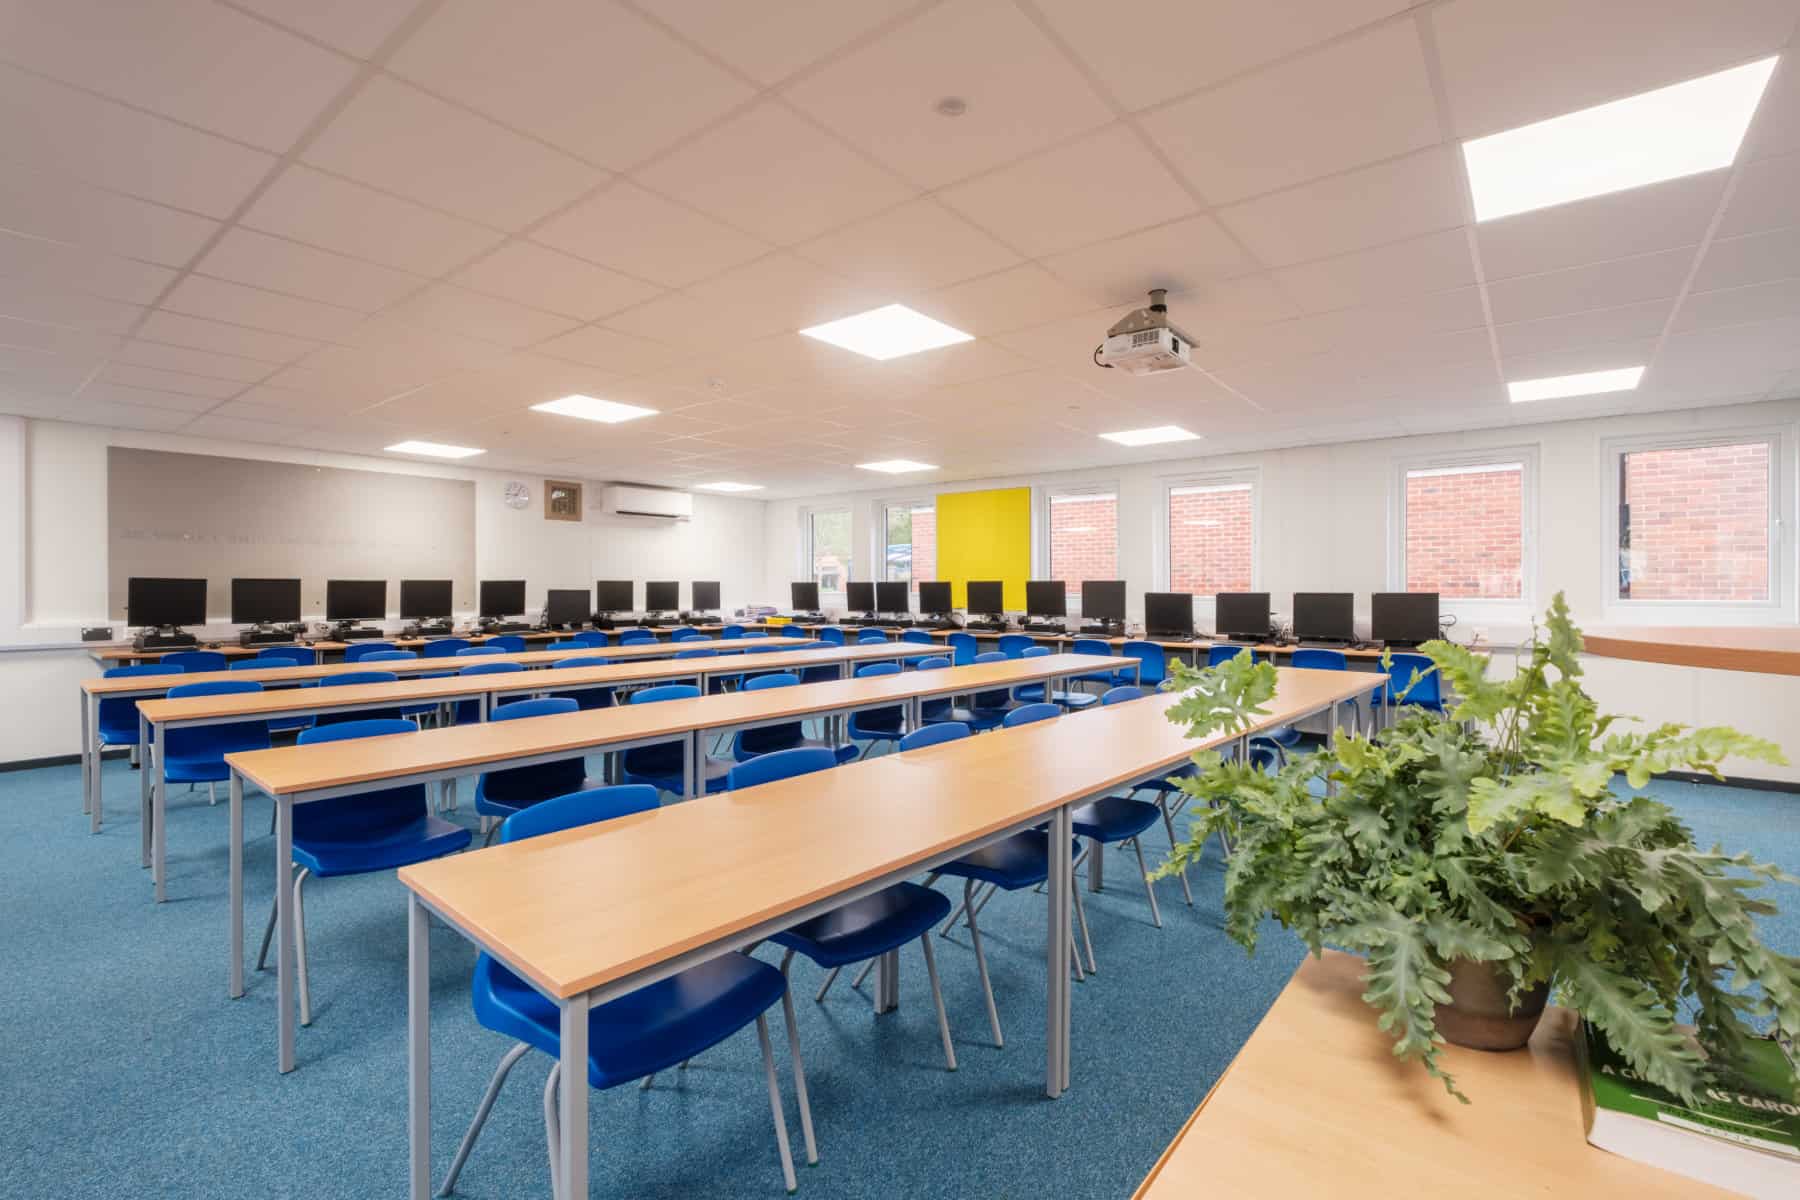 A classroom inside a modular school building. Rows of empty desks and blue chairs are arranged in a computer lab, flanked by workstations with monitors. The environment includes white walls, windows, and a projector. A plant sits on the front desk.